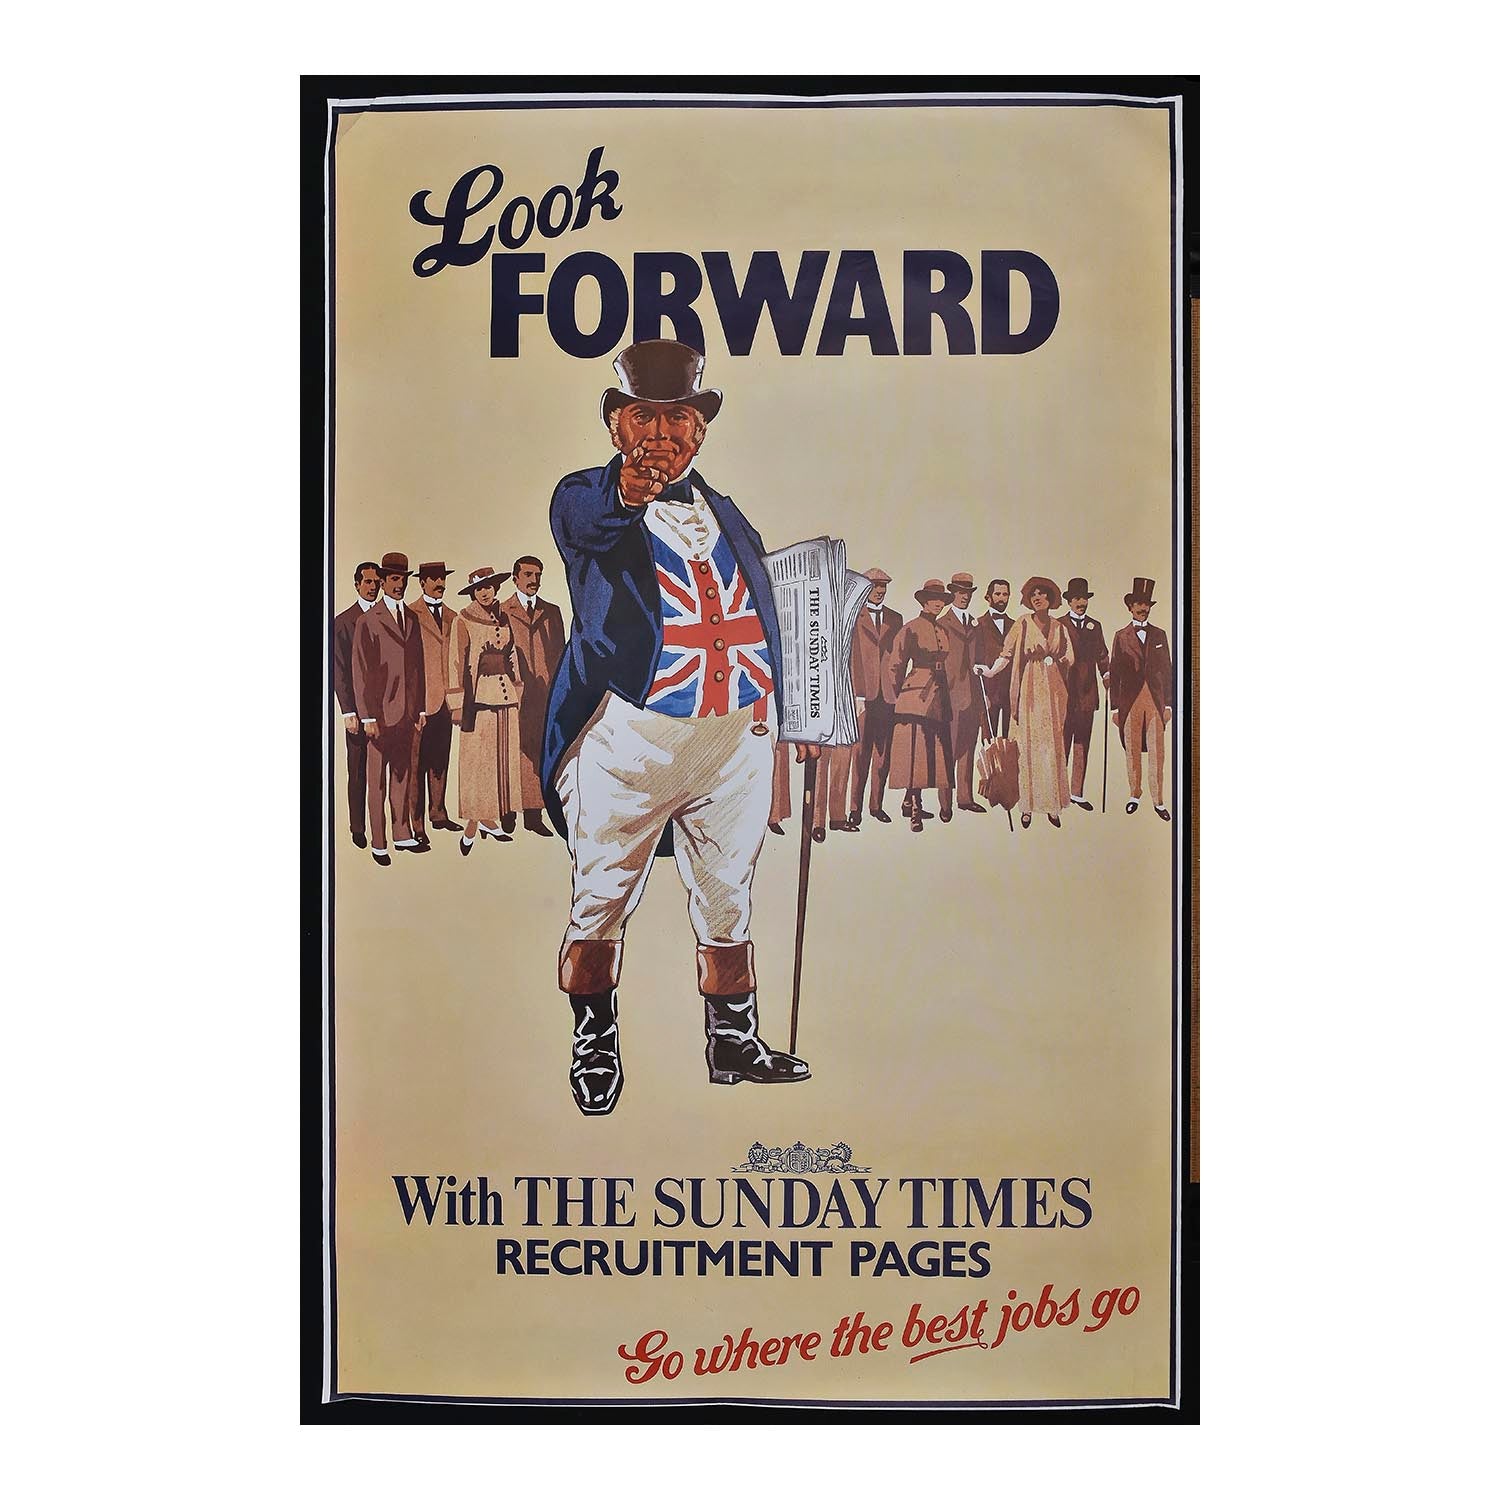 Original, hoardings sized, poster for The Sunday Times, advertising the newspaper’s ‘recruitment’ section, 1980. The design repurposes a well-known First World Ward recruiting poster, featuring the character of John Bull accusingly pointing his finger at the viewer